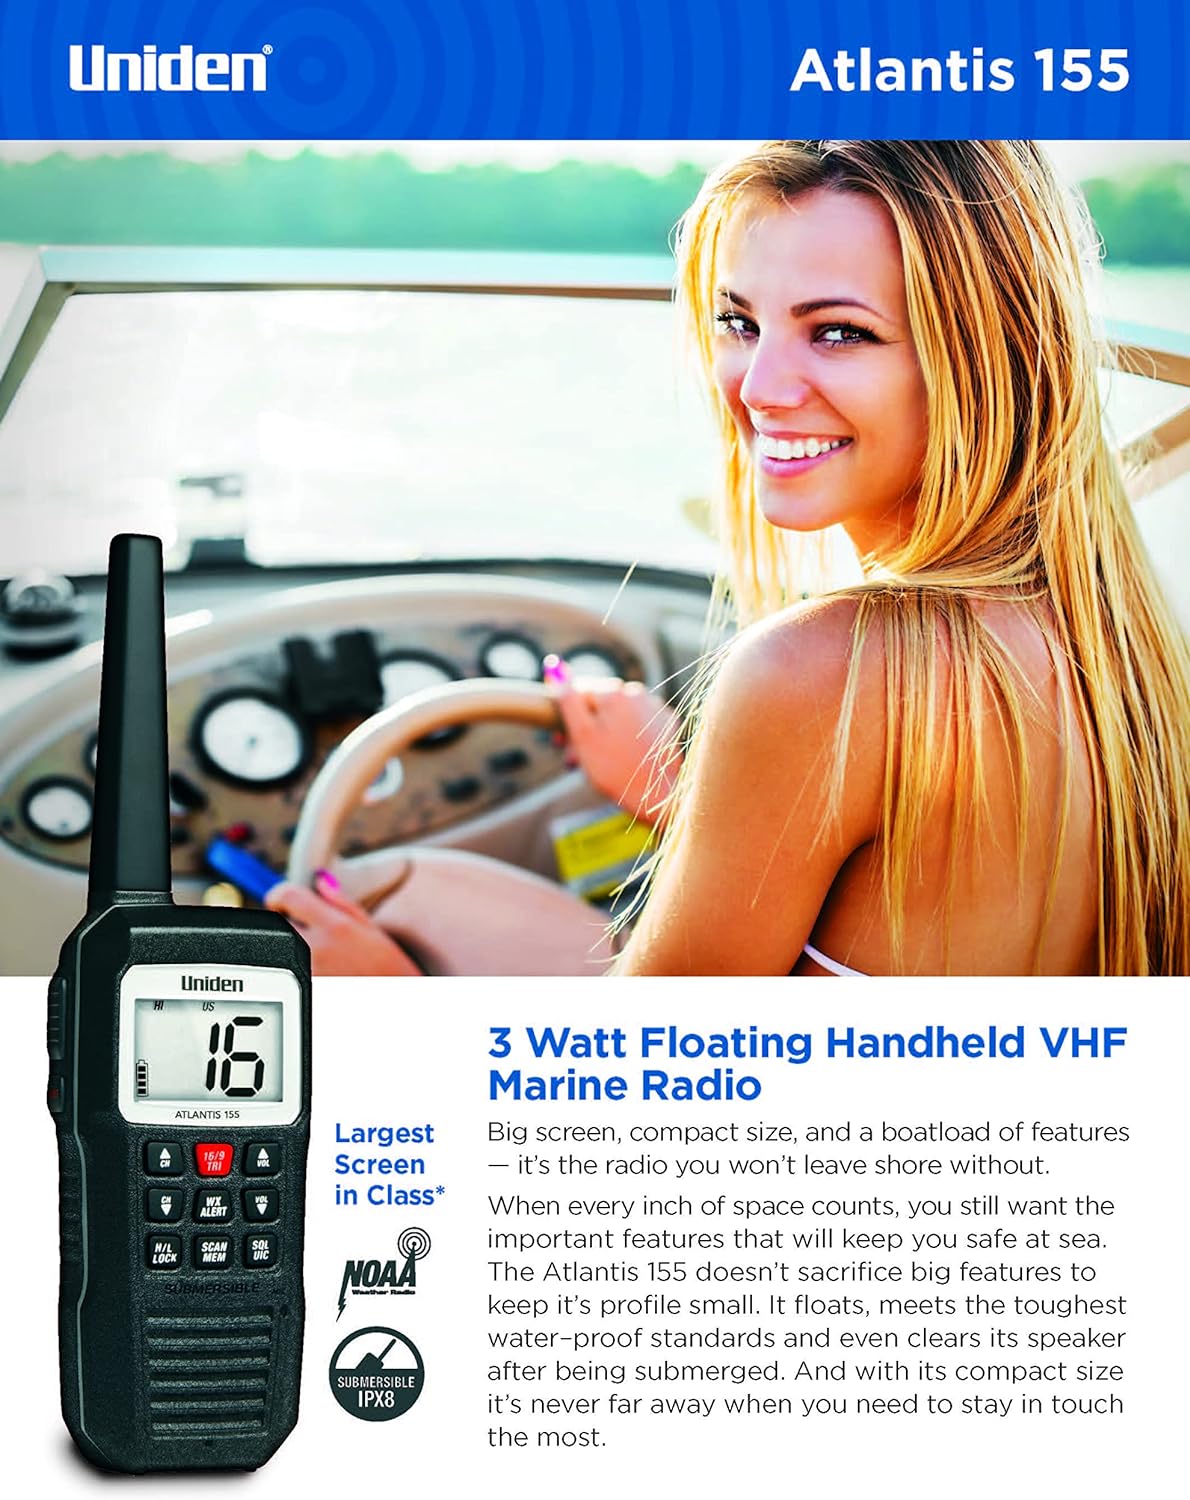 Uniden Atlantis 155 Handheld Two-Way VHF Marine Radio, Floating IPX8 Submersible Waterproof, Dual-Color Screen, All USA/International/Canadian Marine Channels, NOAA Weather Alert, 10 Hour Battery - Uniden Atlantis 155 Handheld Two-Way VHF Marine Radio Review